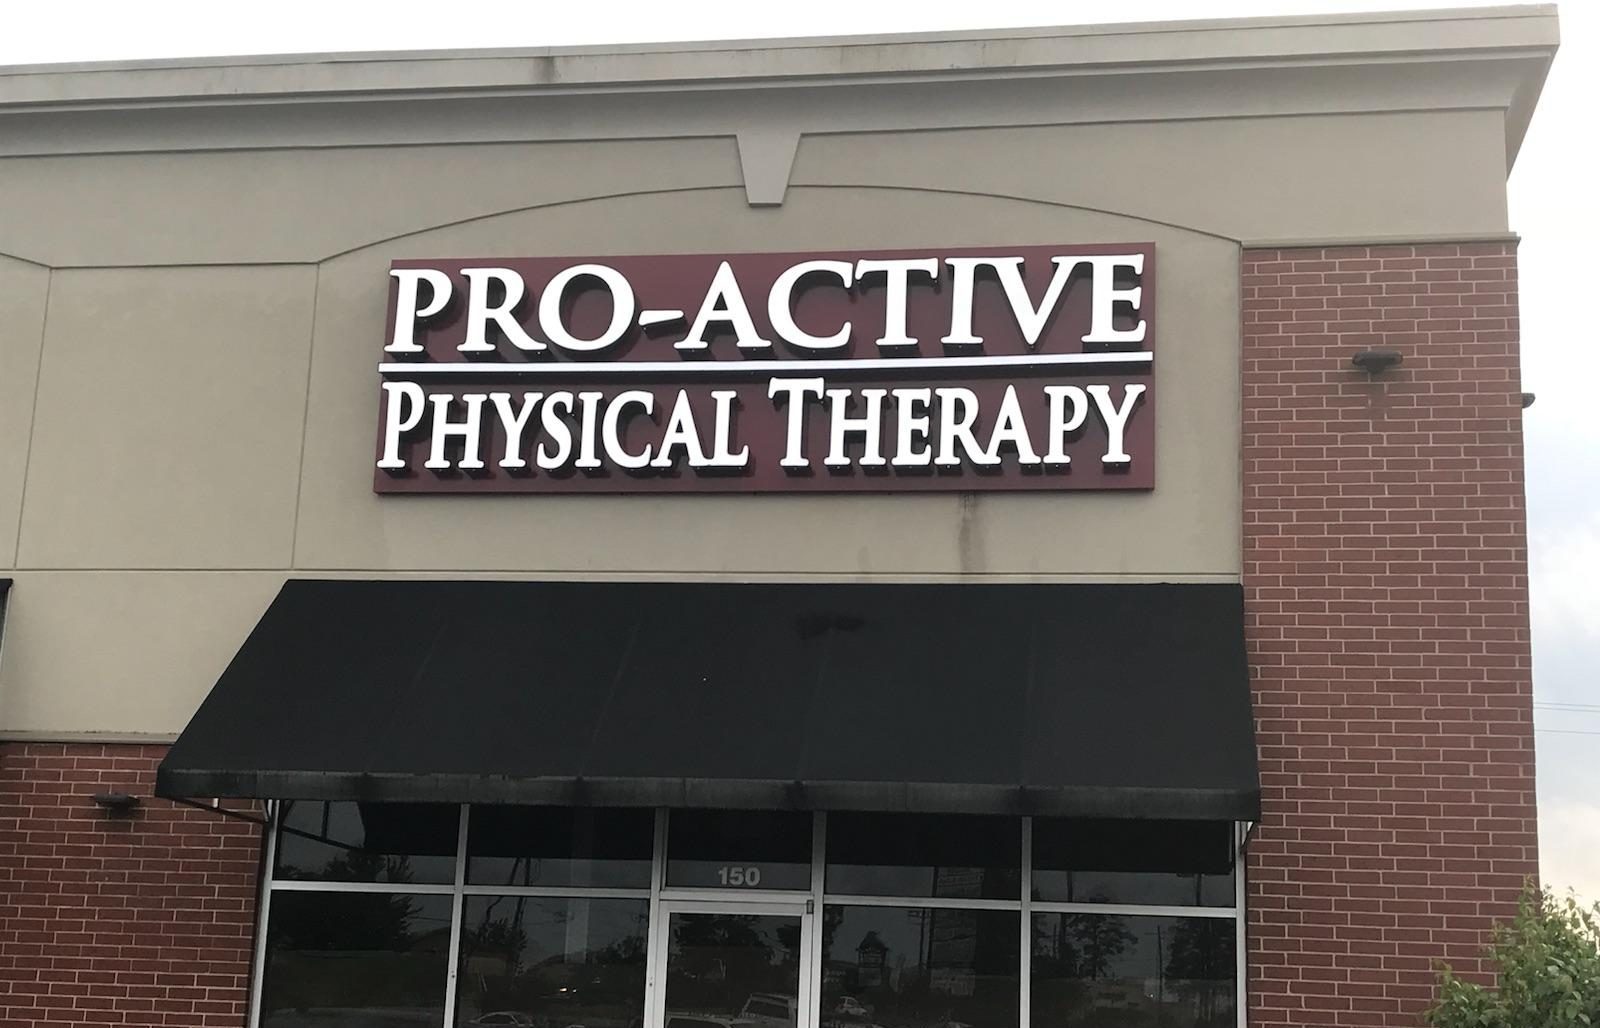 PRO-ACTIVE PHYSICAL THERAPY SHERIDAN, AR